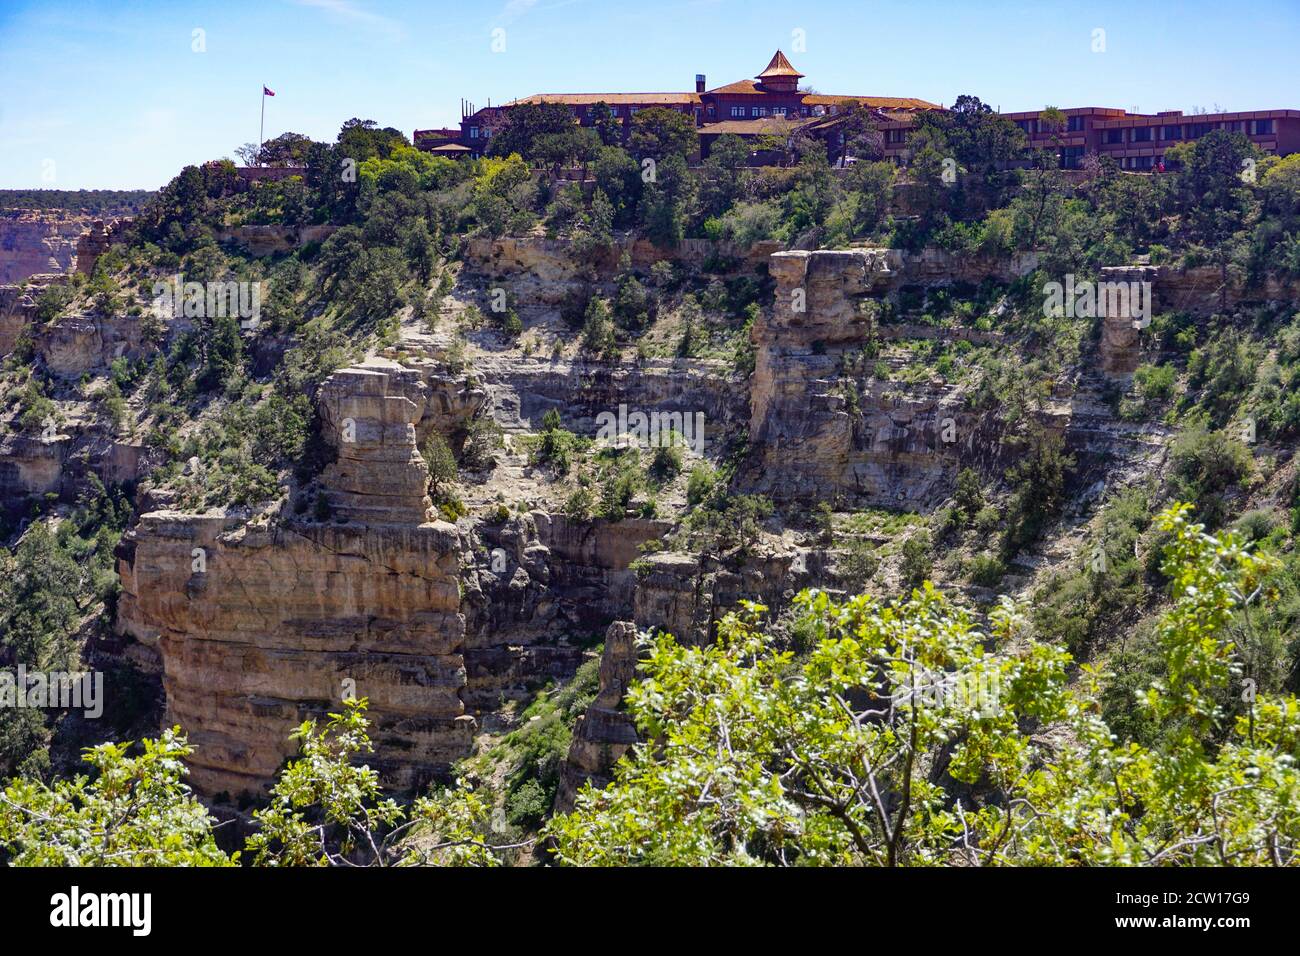 Grand Canyon National Park, Arizona: The El Tovar Hotel, on the South Rim of the Grand Canyon. Stock Photo